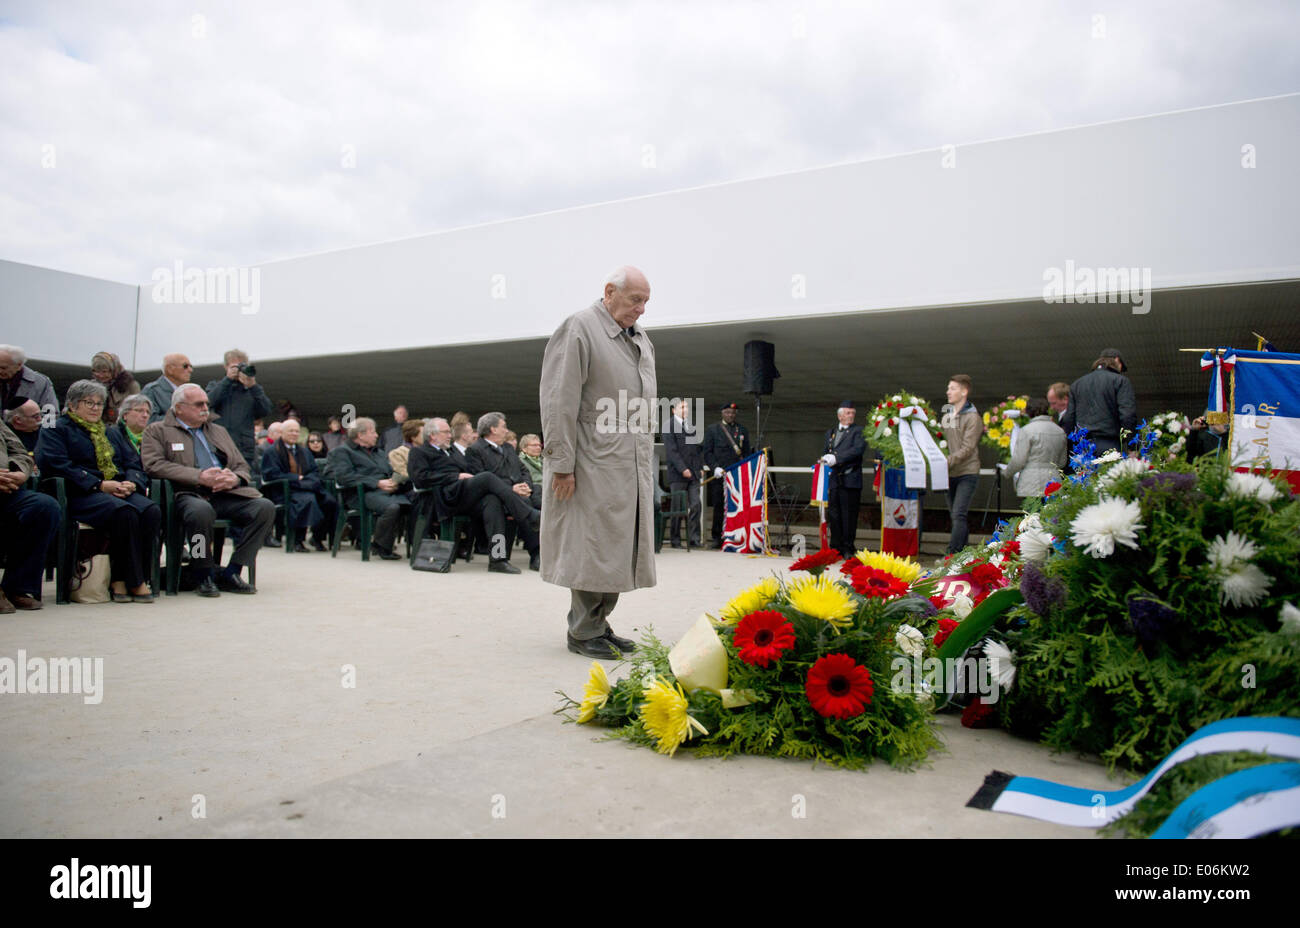 Oranienburg, Germany. 04th May, 2014. Edgar Frischmann, Sachsenhausen concentration camp survivor, lays a wreath during the ceremony to mark the 69th anniversary of the liberation of Sachsenhausen and Ravensbrueck concentration camps at Station Z in Oranienburg, Germany, 04 May 2014. The pupils want to turn a former prisoner of war camp into a memorial. The 69th anniversary of the liberation is celebrated on 04 May 2014. Photo: DANIEL NAUPOLD/dpa/Alamy Live News Stock Photo